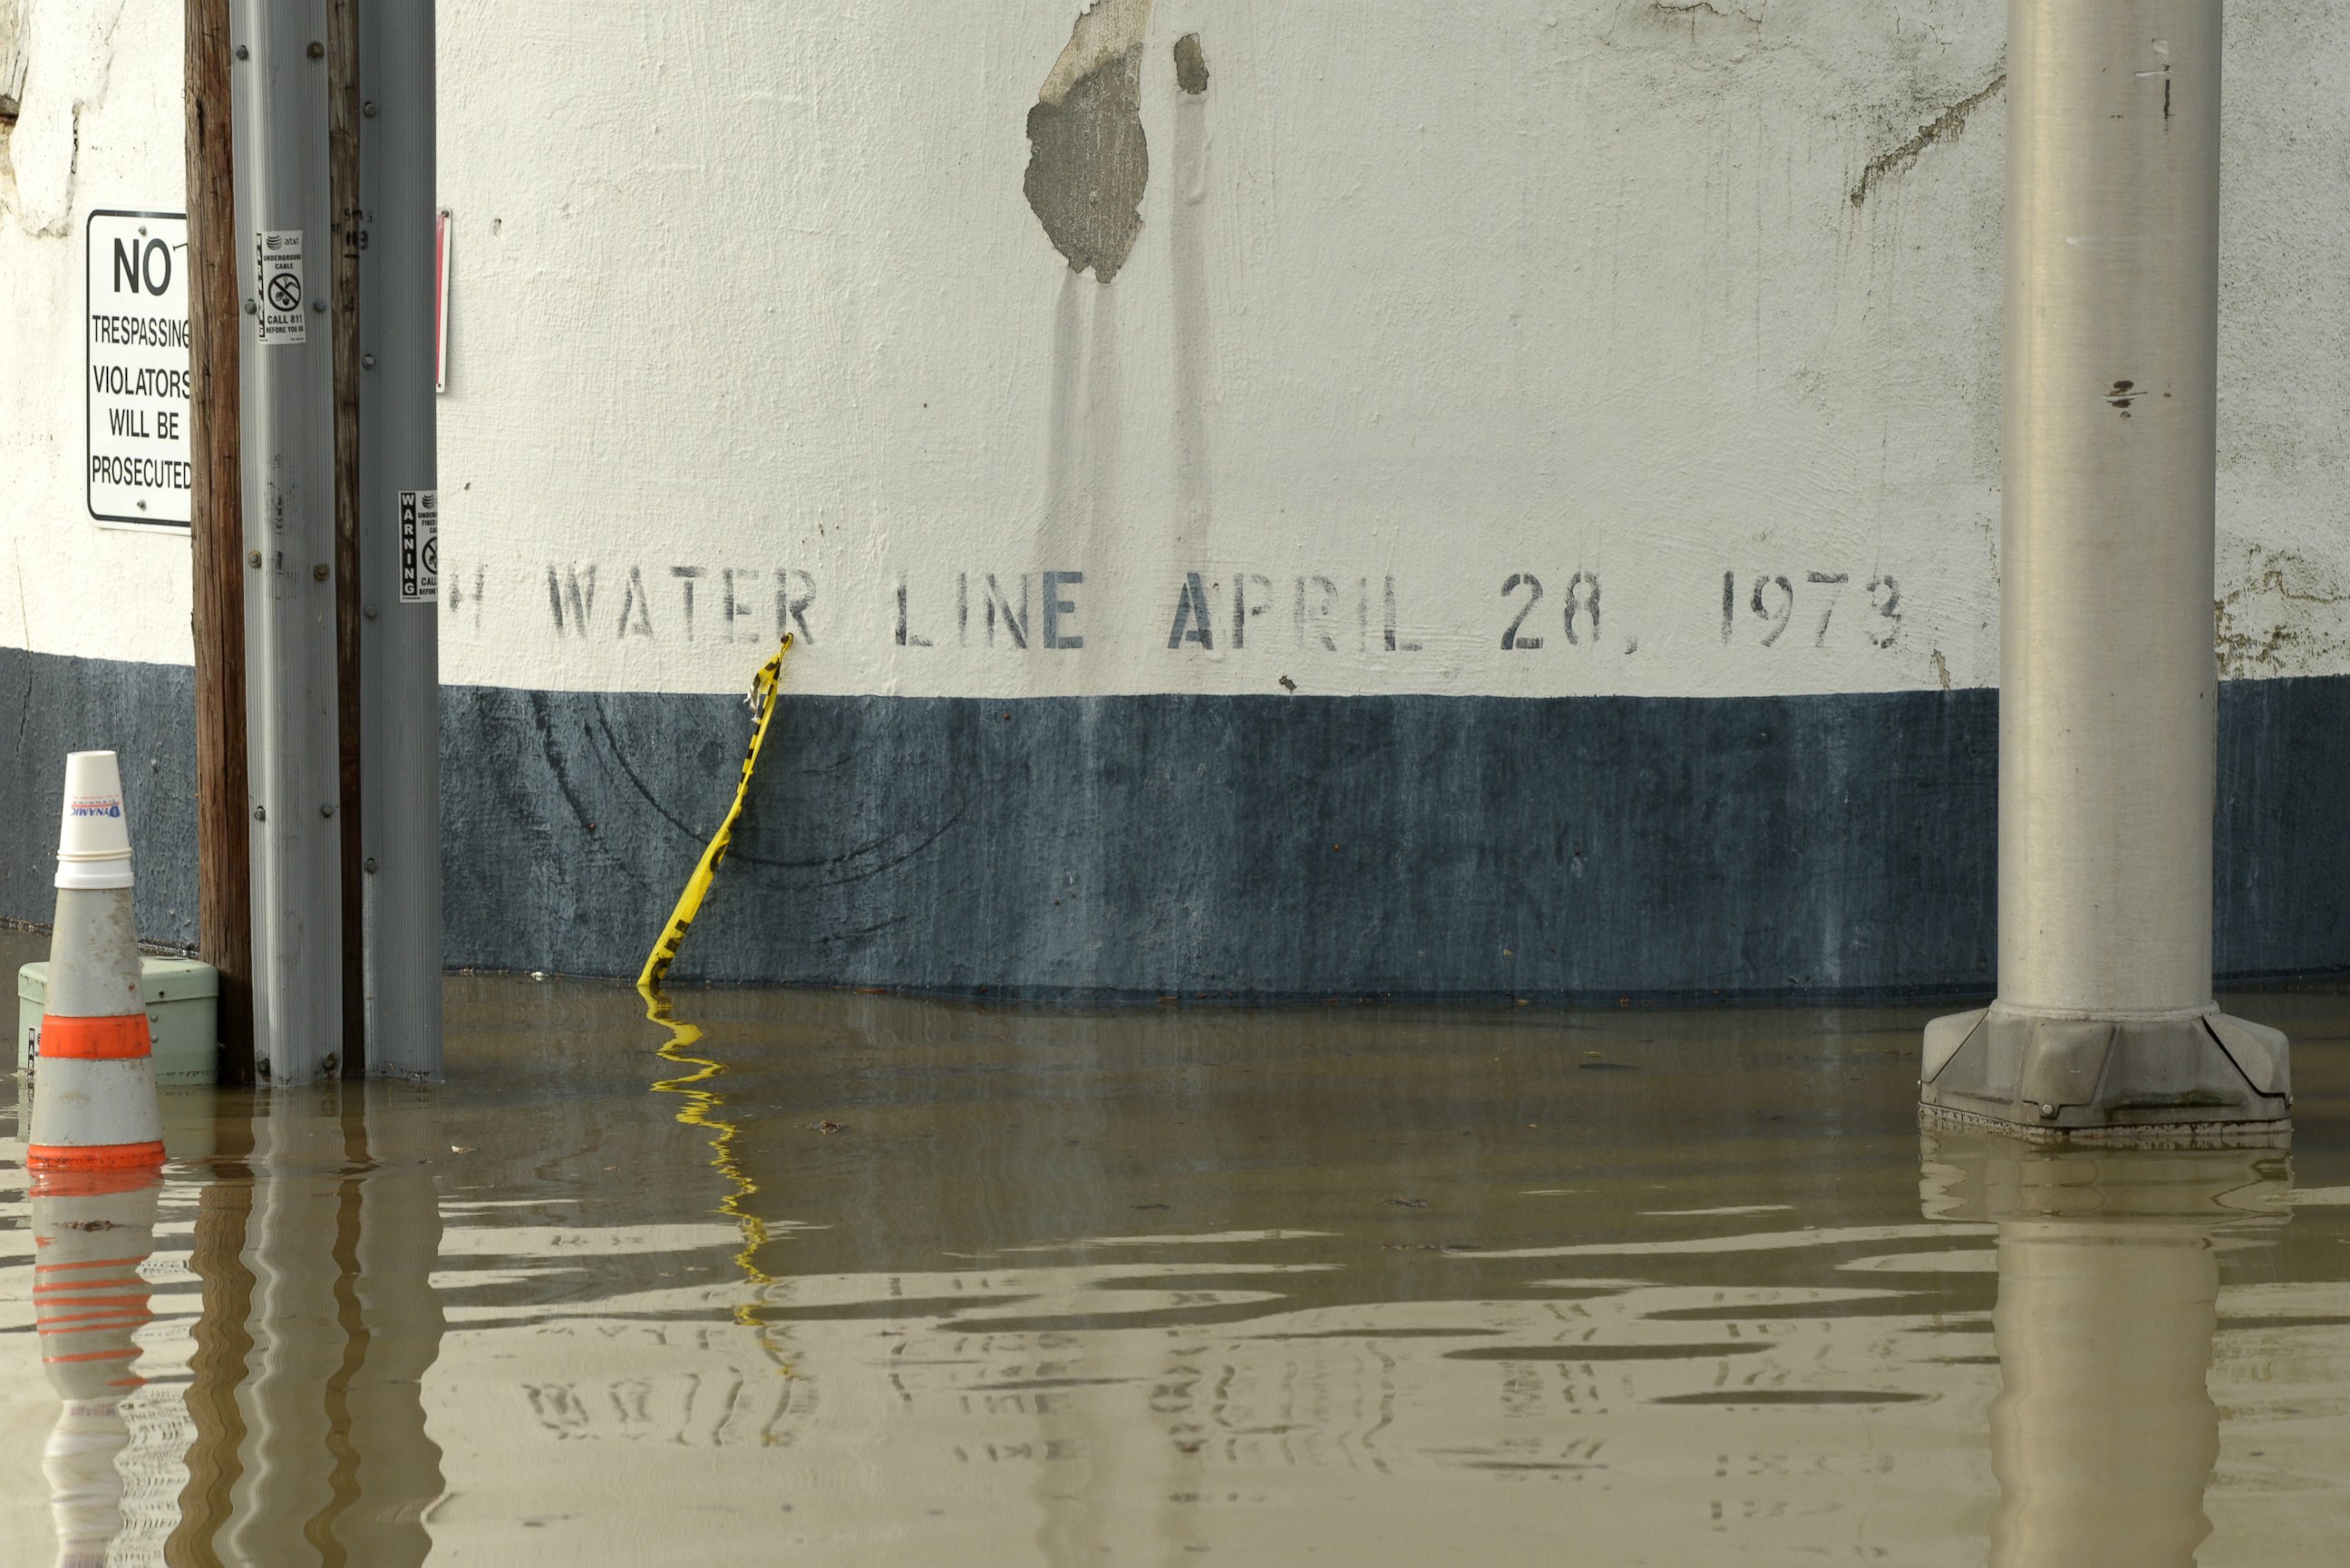 PHOTO: Flood water near the Ardent Mills get close to historic flood level of 1973. The black band on the silo wall indicates the level of water during the April 28, 1973 floods.